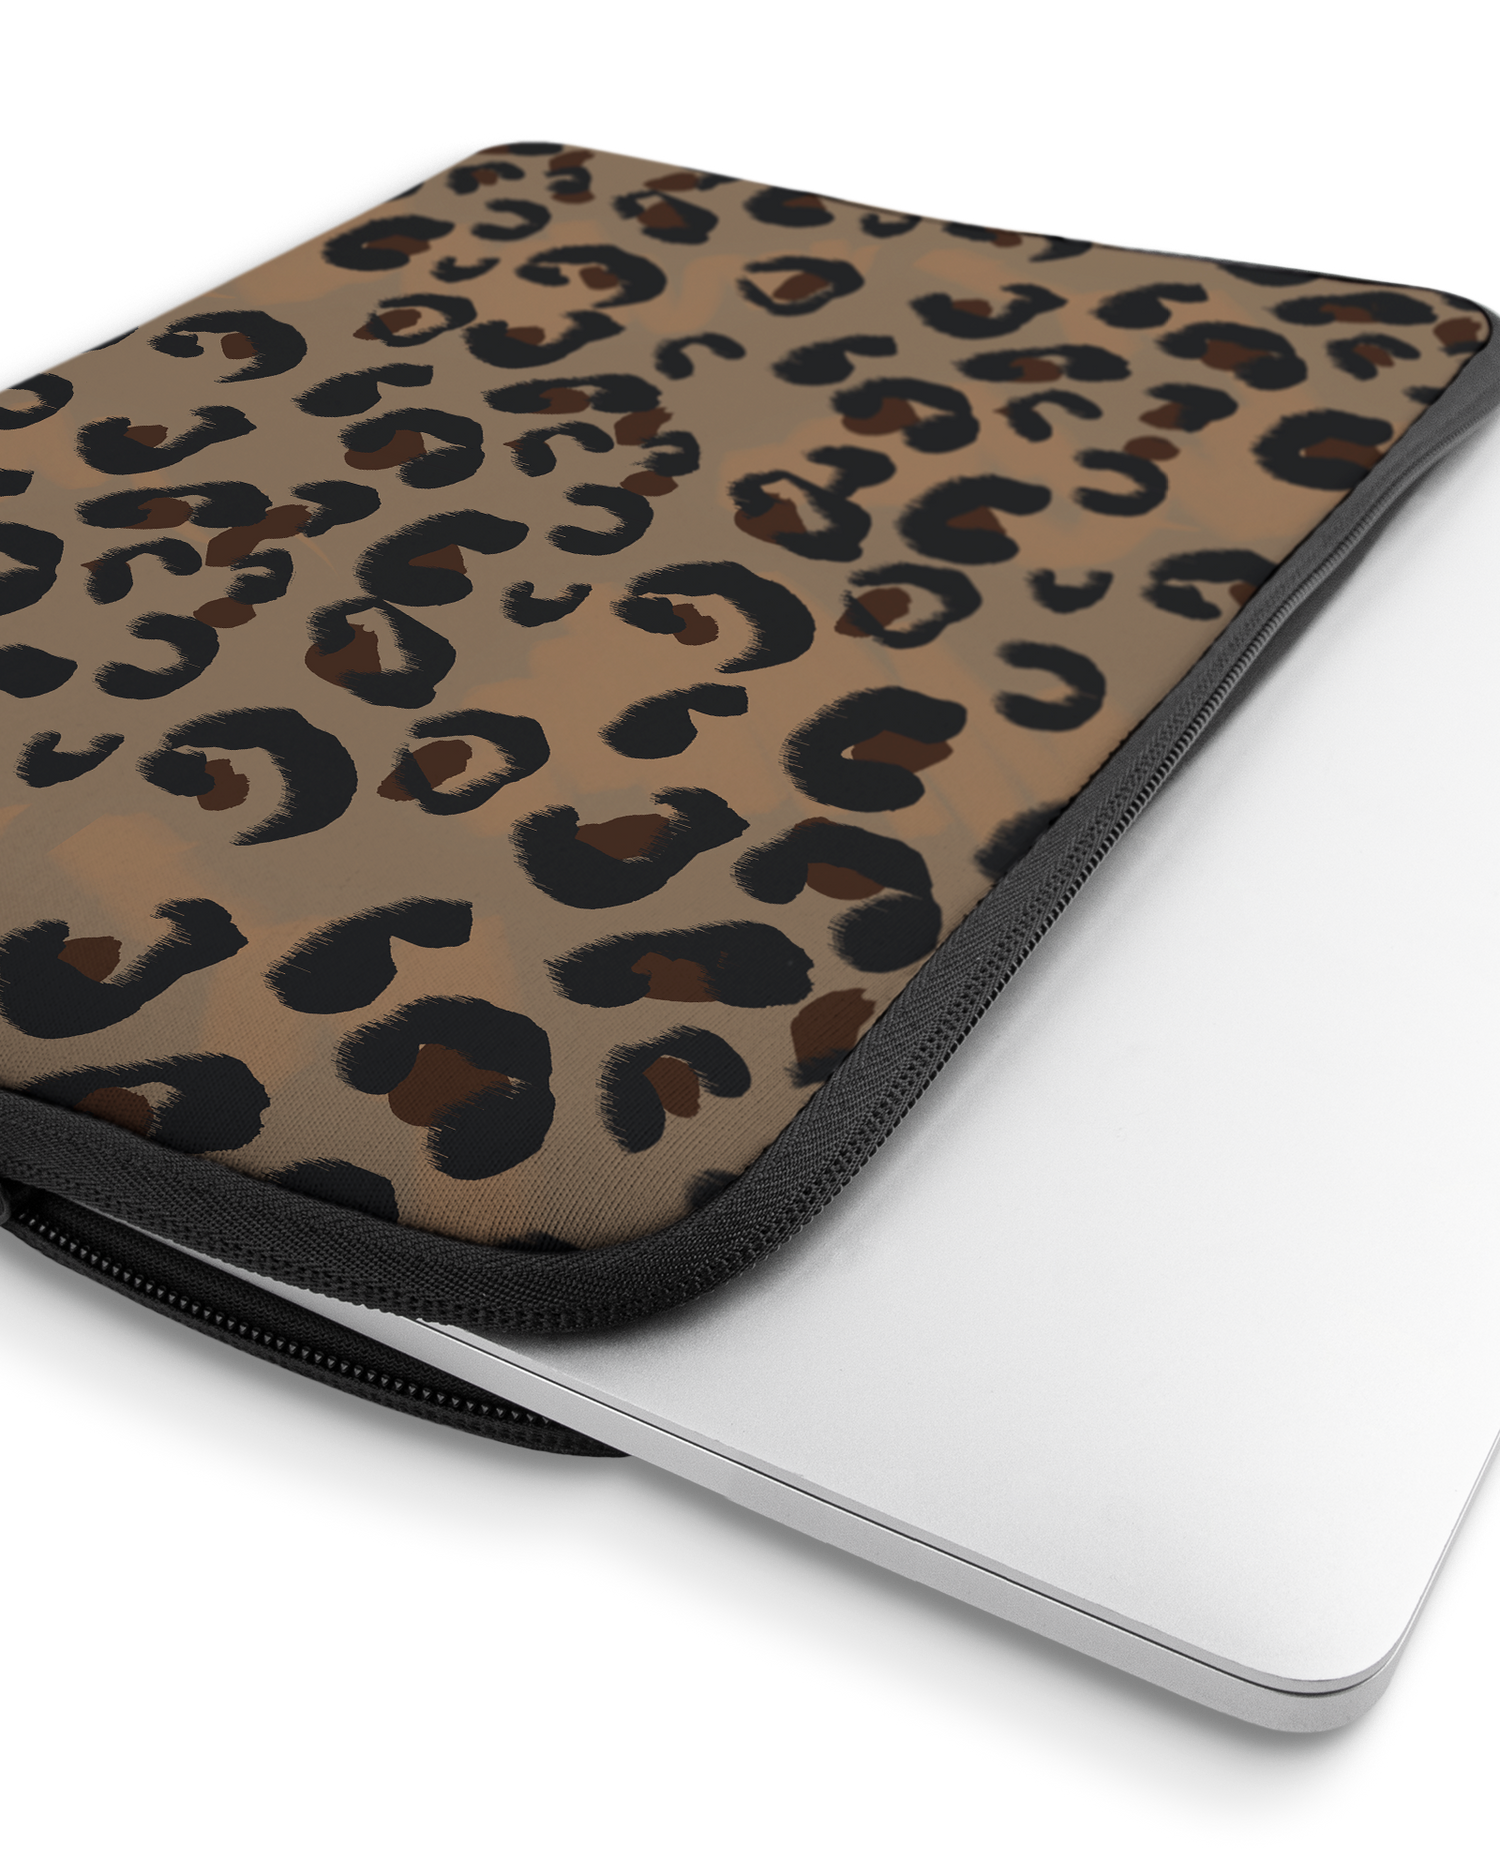 Leopard Repeat Laptop Case 16 inch with device inside